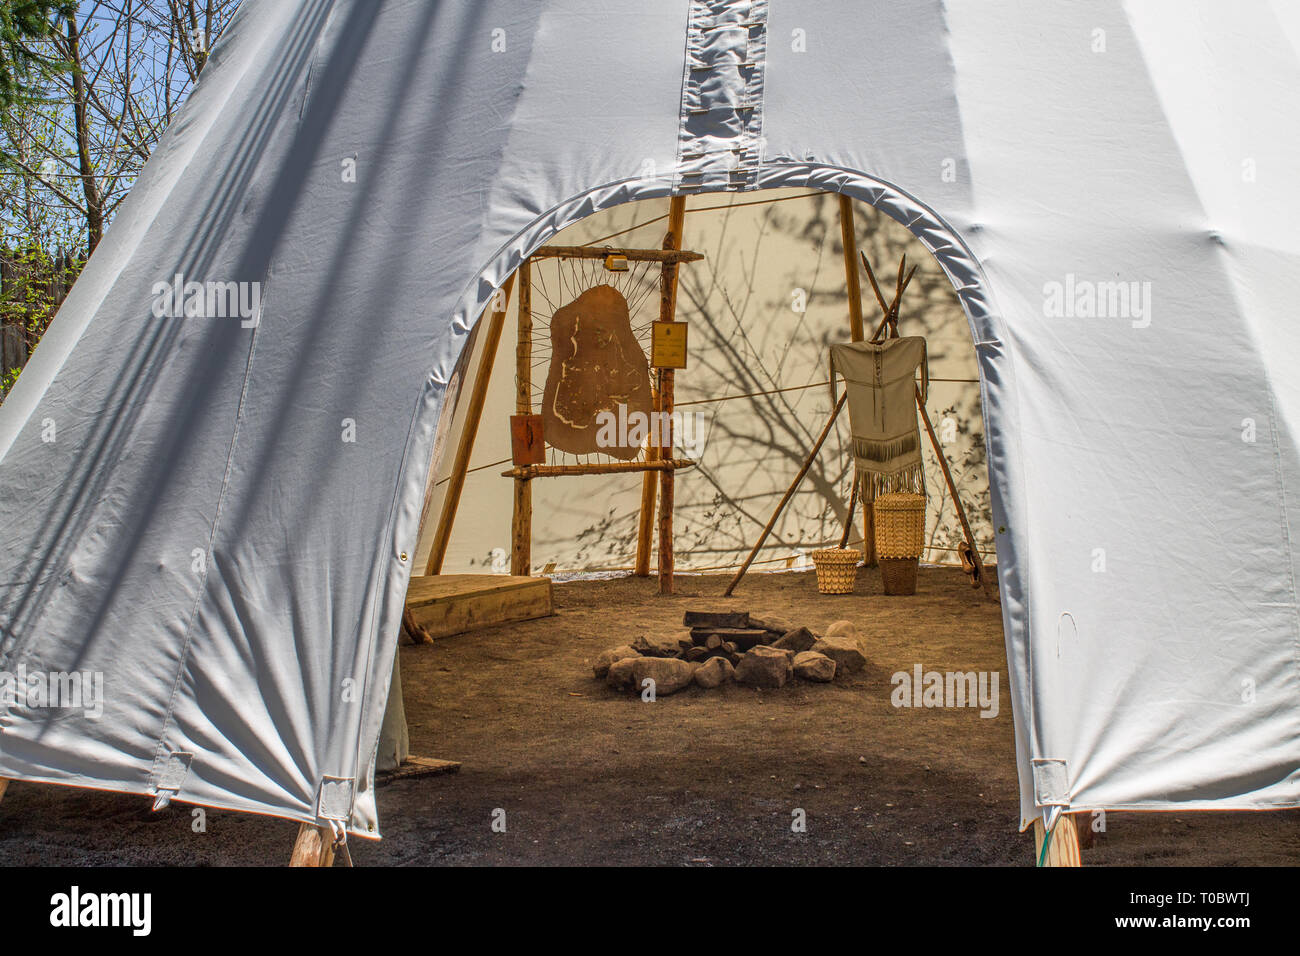 Inside a wigwam with some belongings Stock Photo